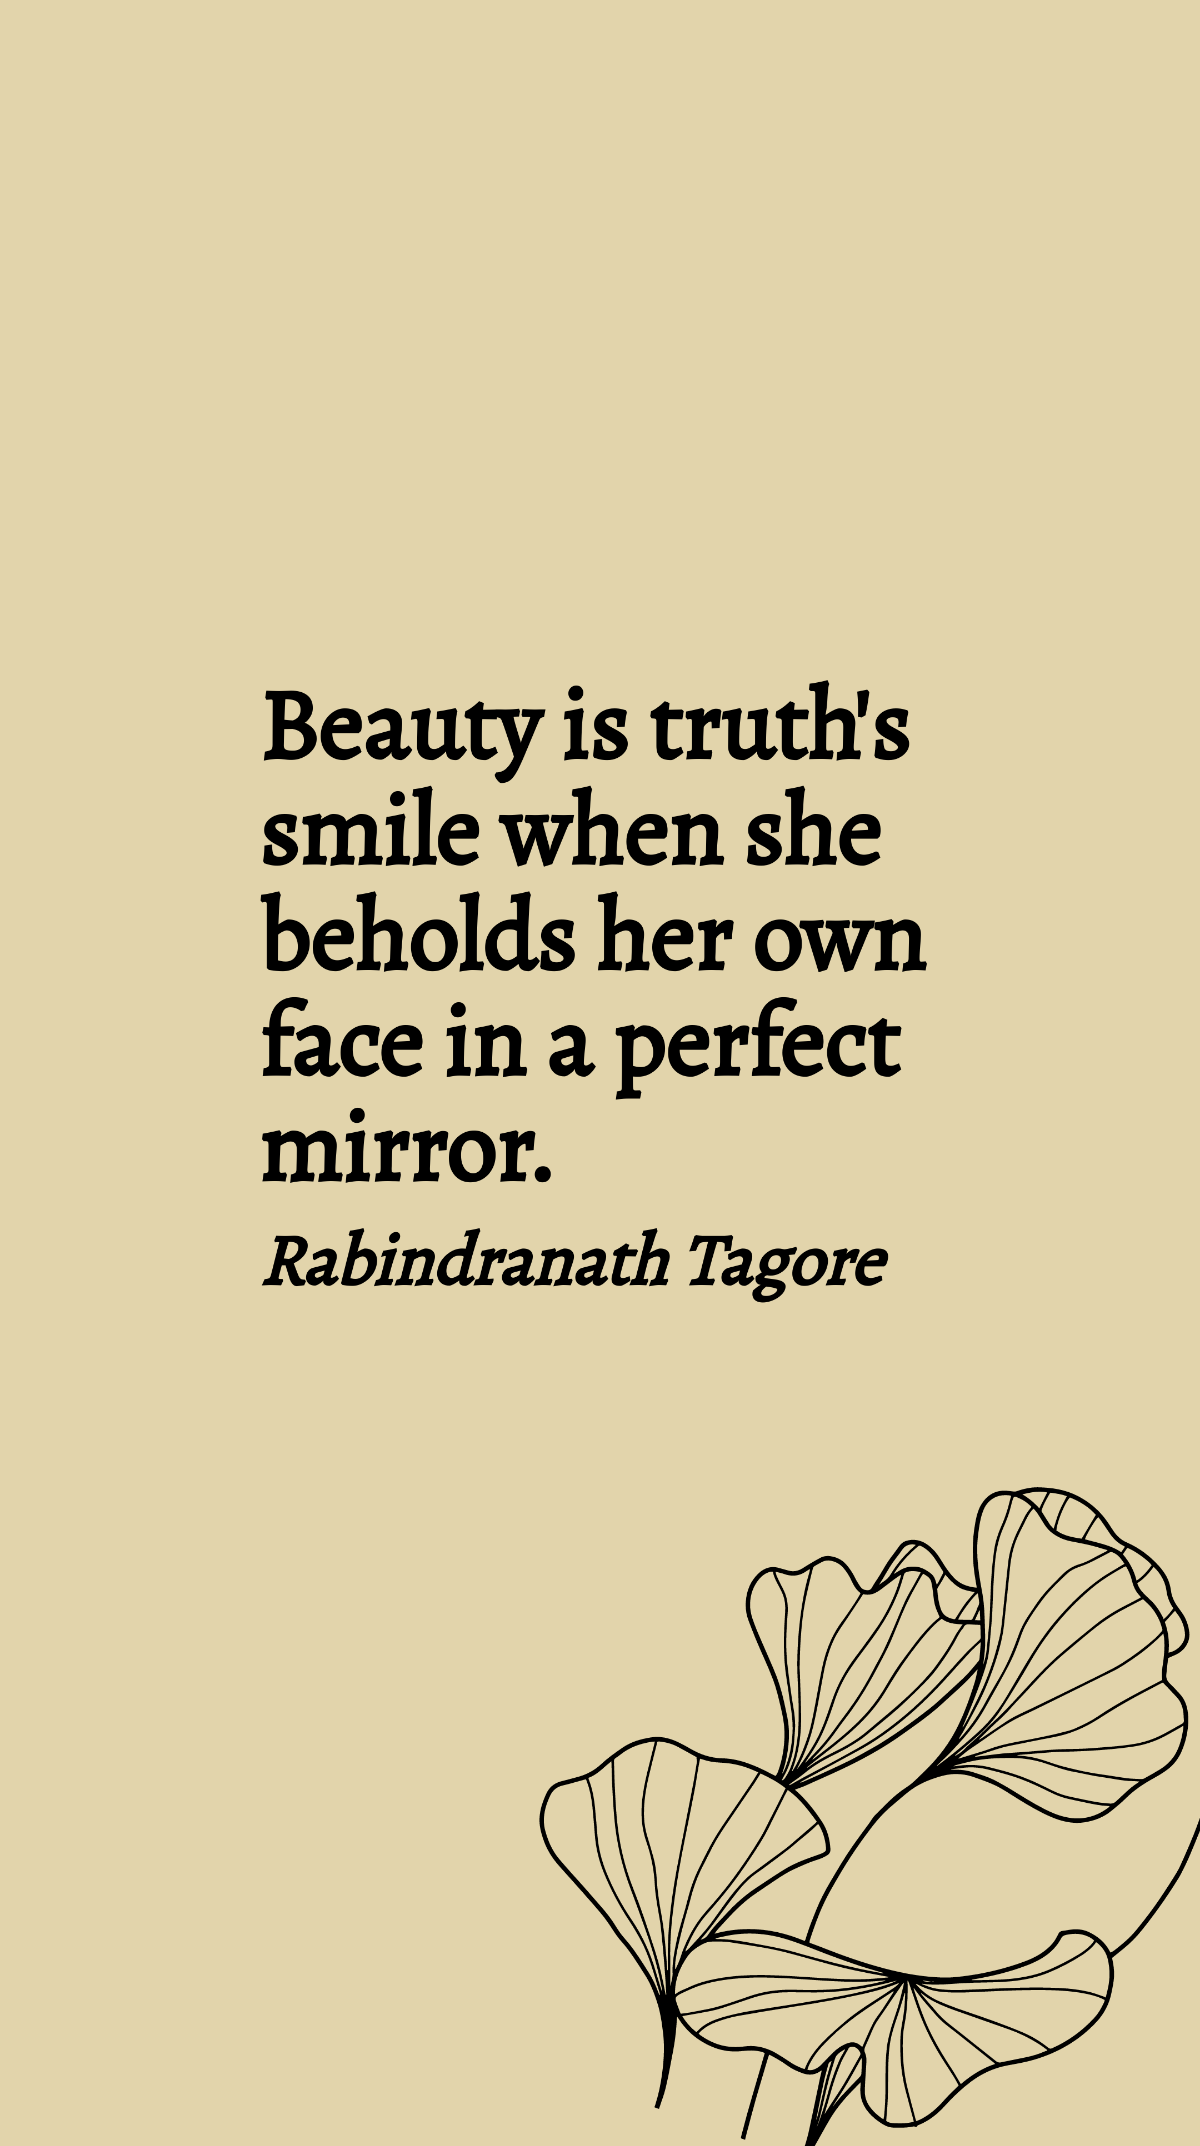 Rabindranath Tagore - Beauty is truth's smile when she beholds her own face in a perfect mirror. Template